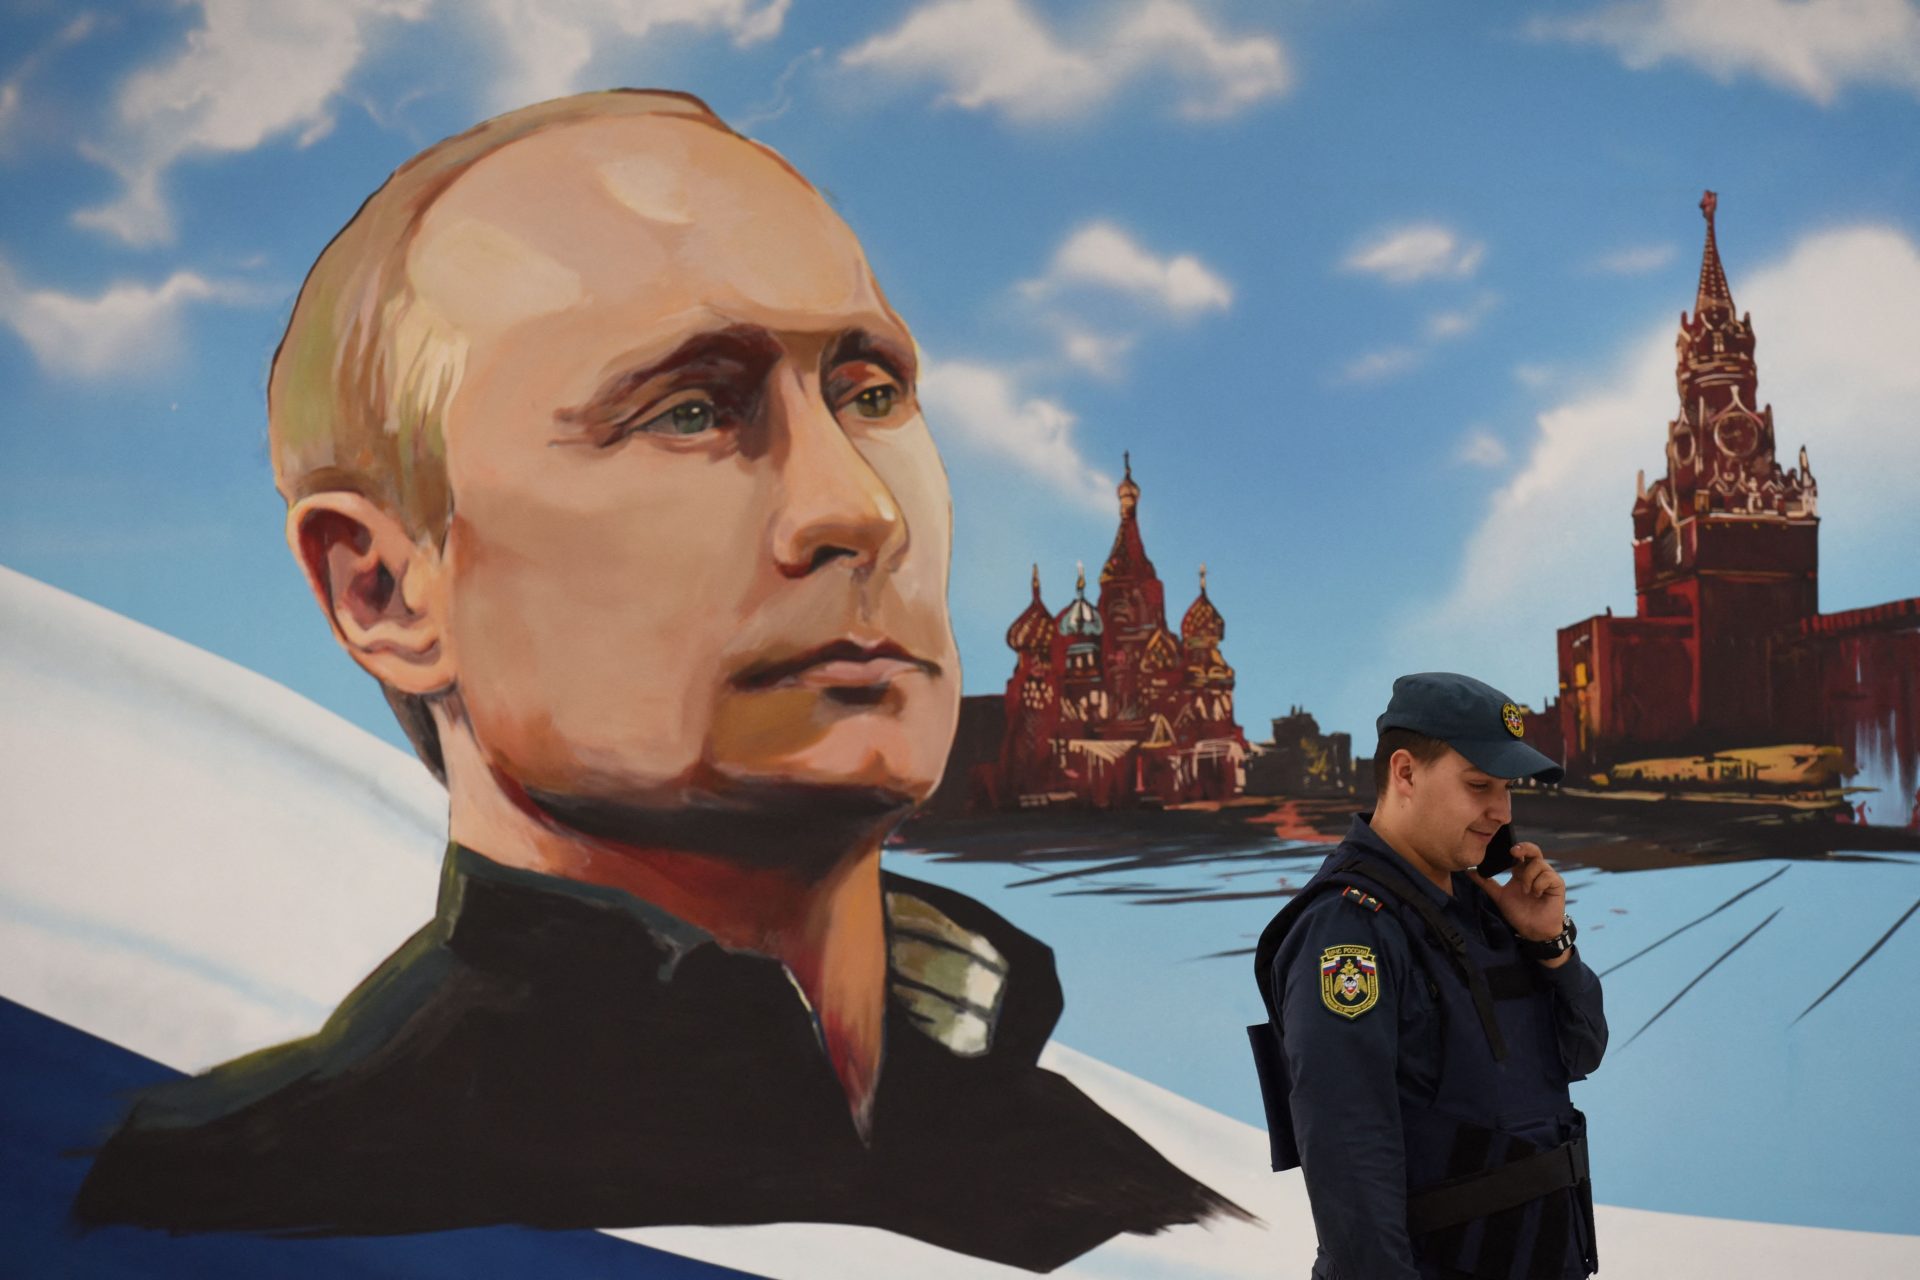 Russia’s next election could be the death knell for the war in Ukraine